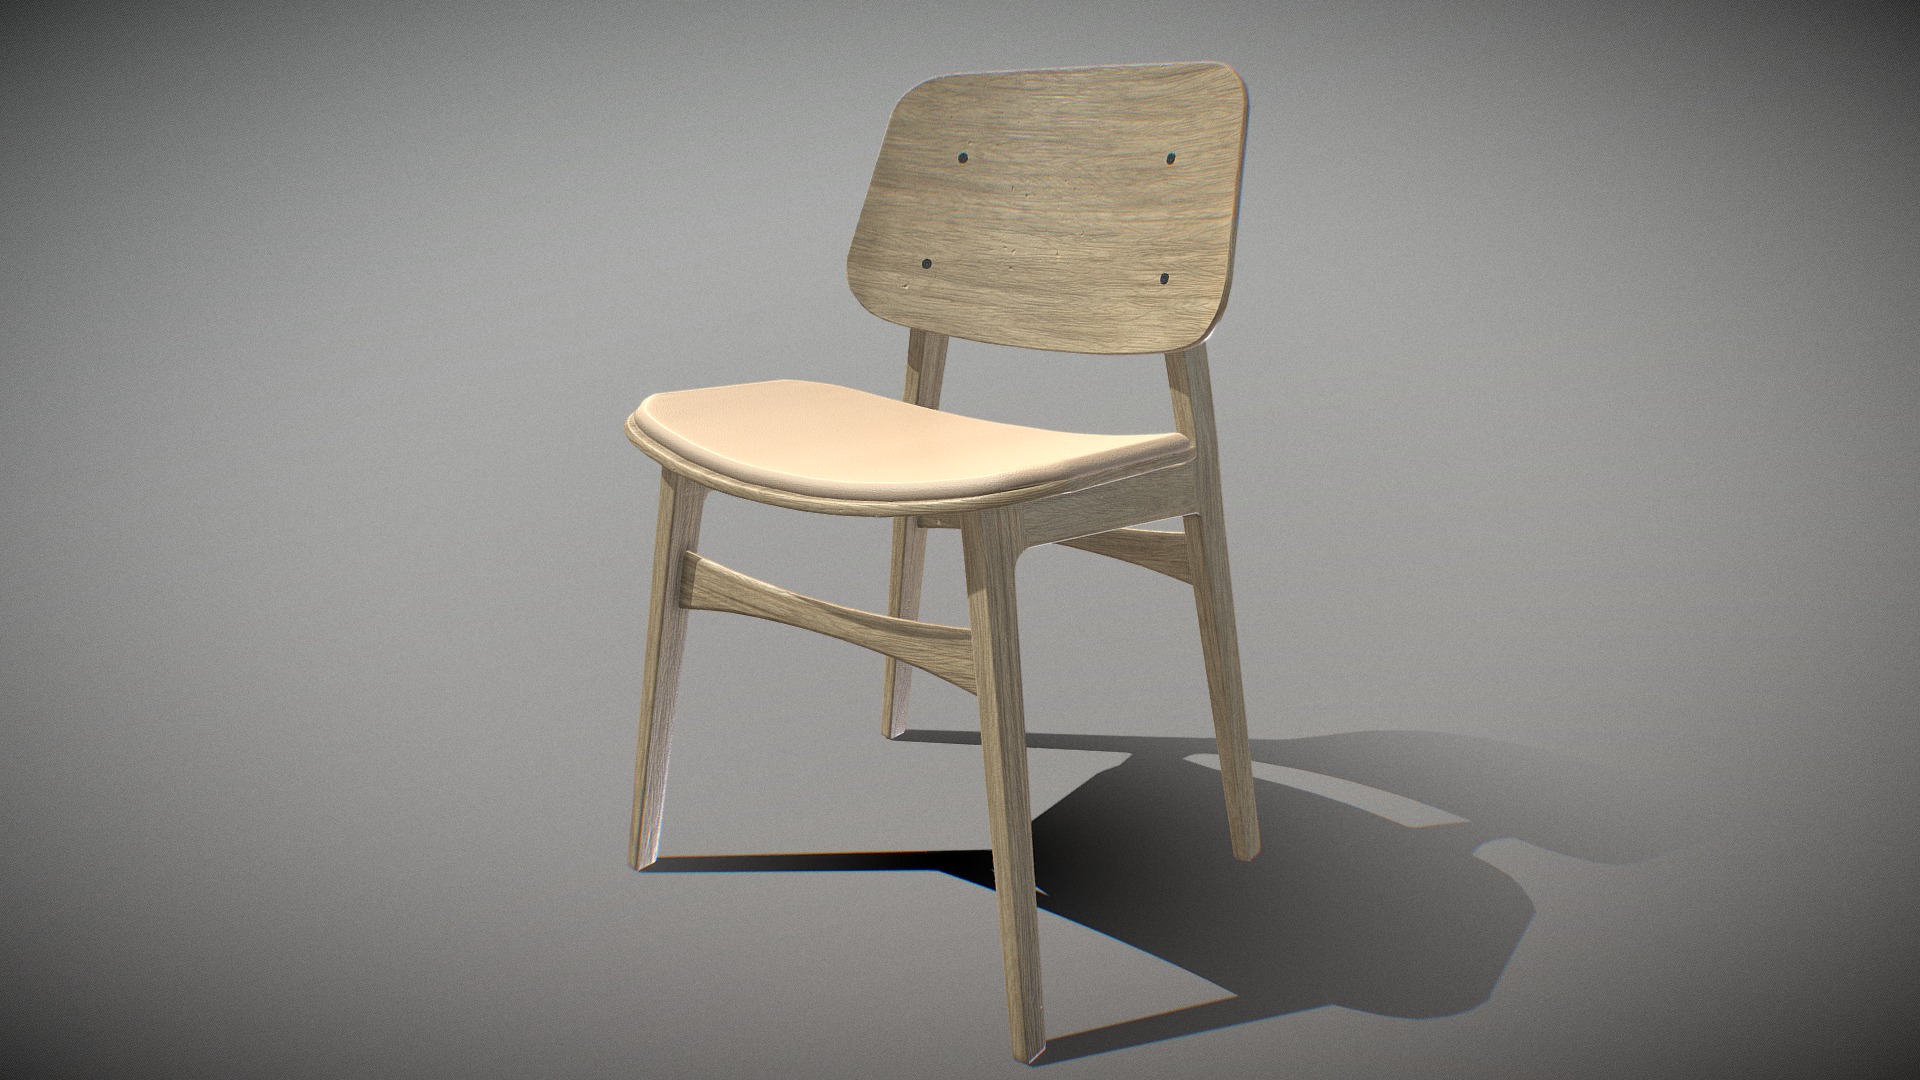 3D model Soborg Chair-3051-lacquered oak and leather - This is a 3D model of the Soborg Chair-3051-lacquered oak and leather. The 3D model is about a wooden chair on a white background.